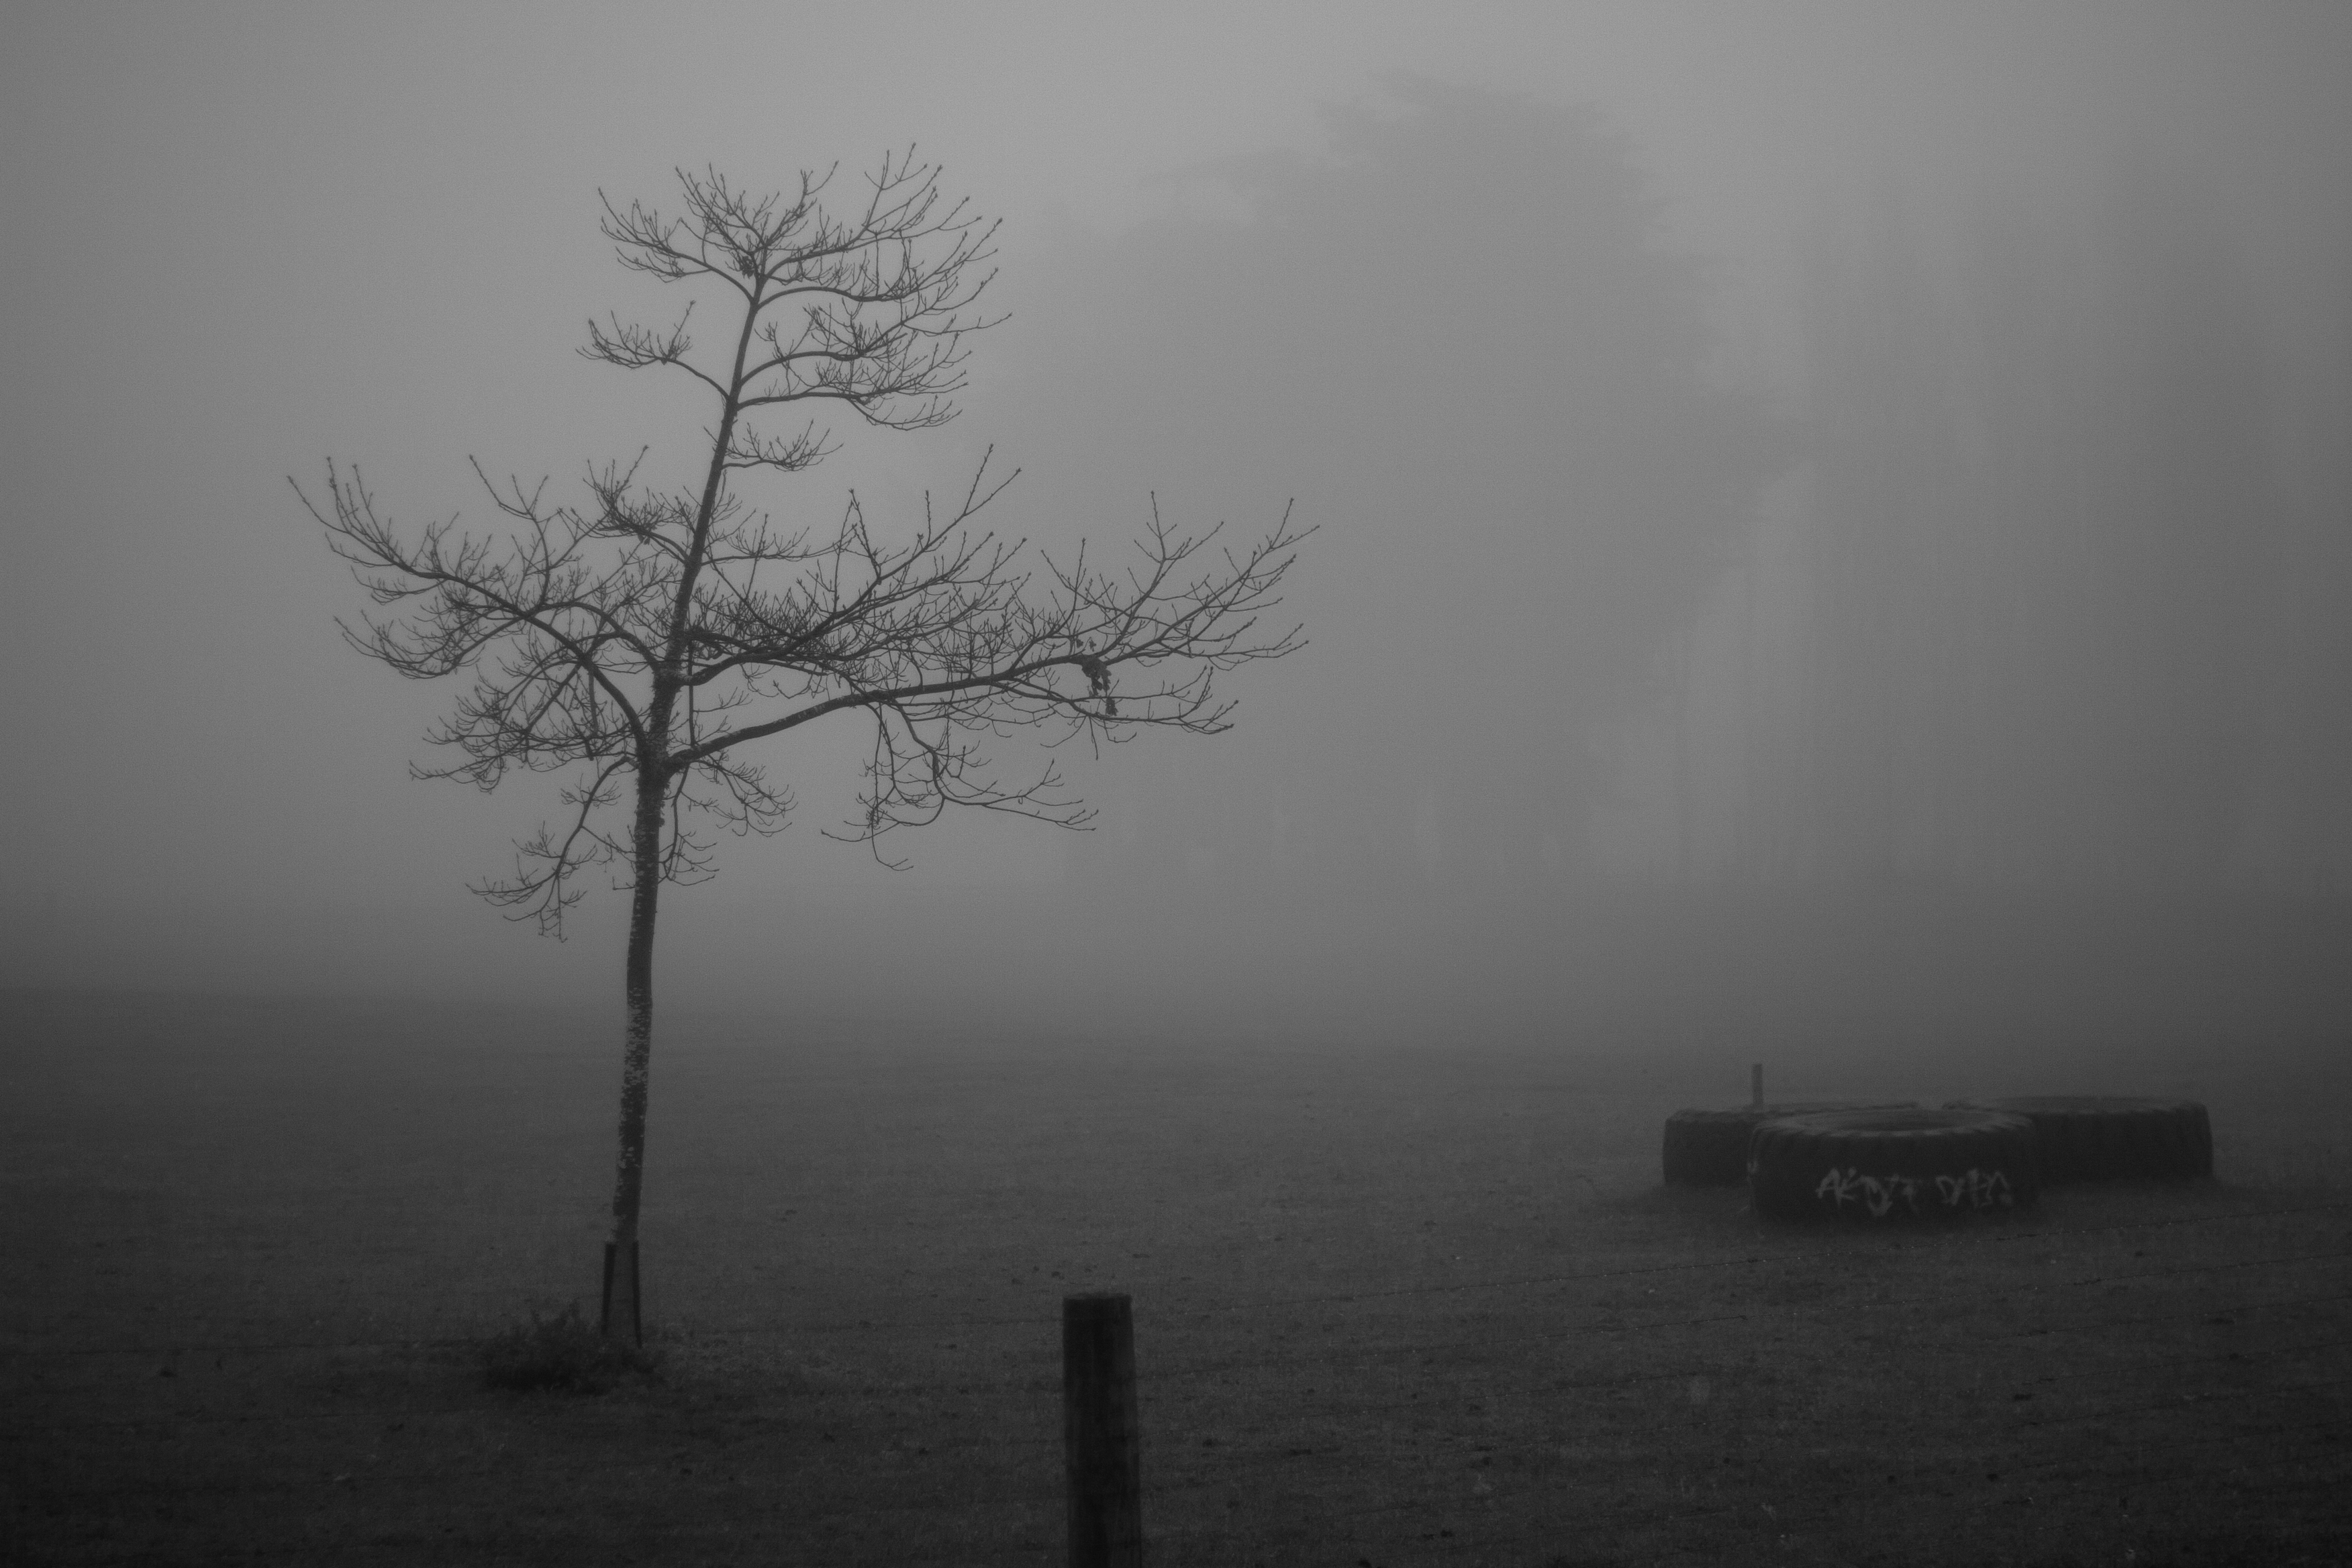 bare tree in the foreground with the outlines of larger trees barely visible through fog